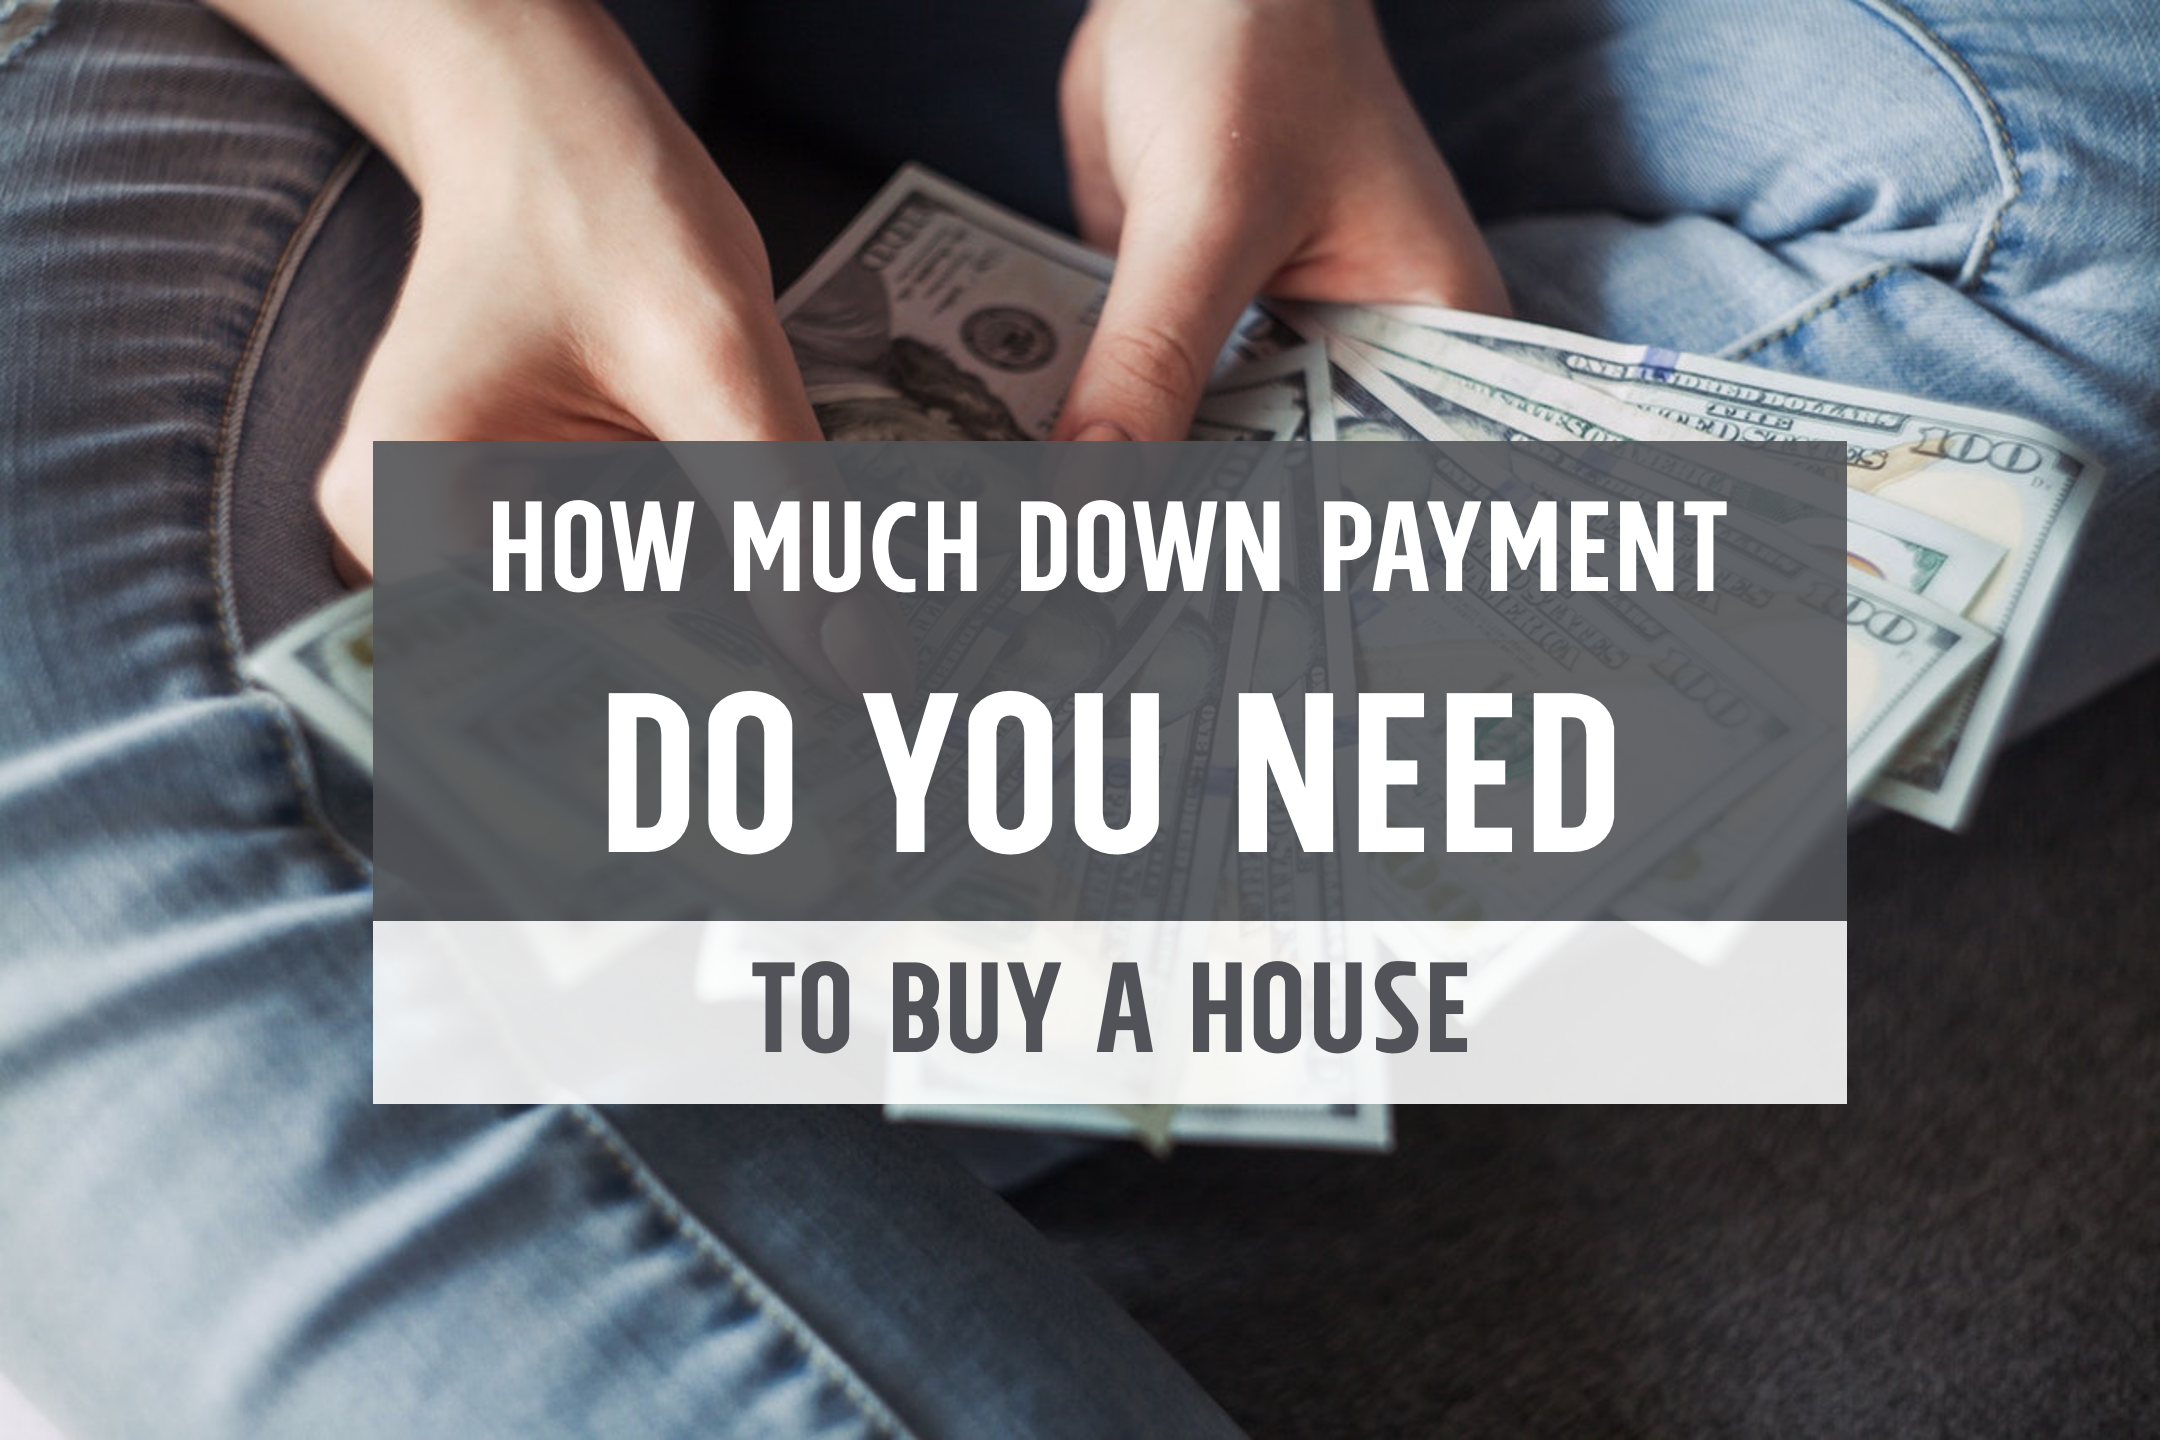 How Much Down Payment Is Needed To Buy a house